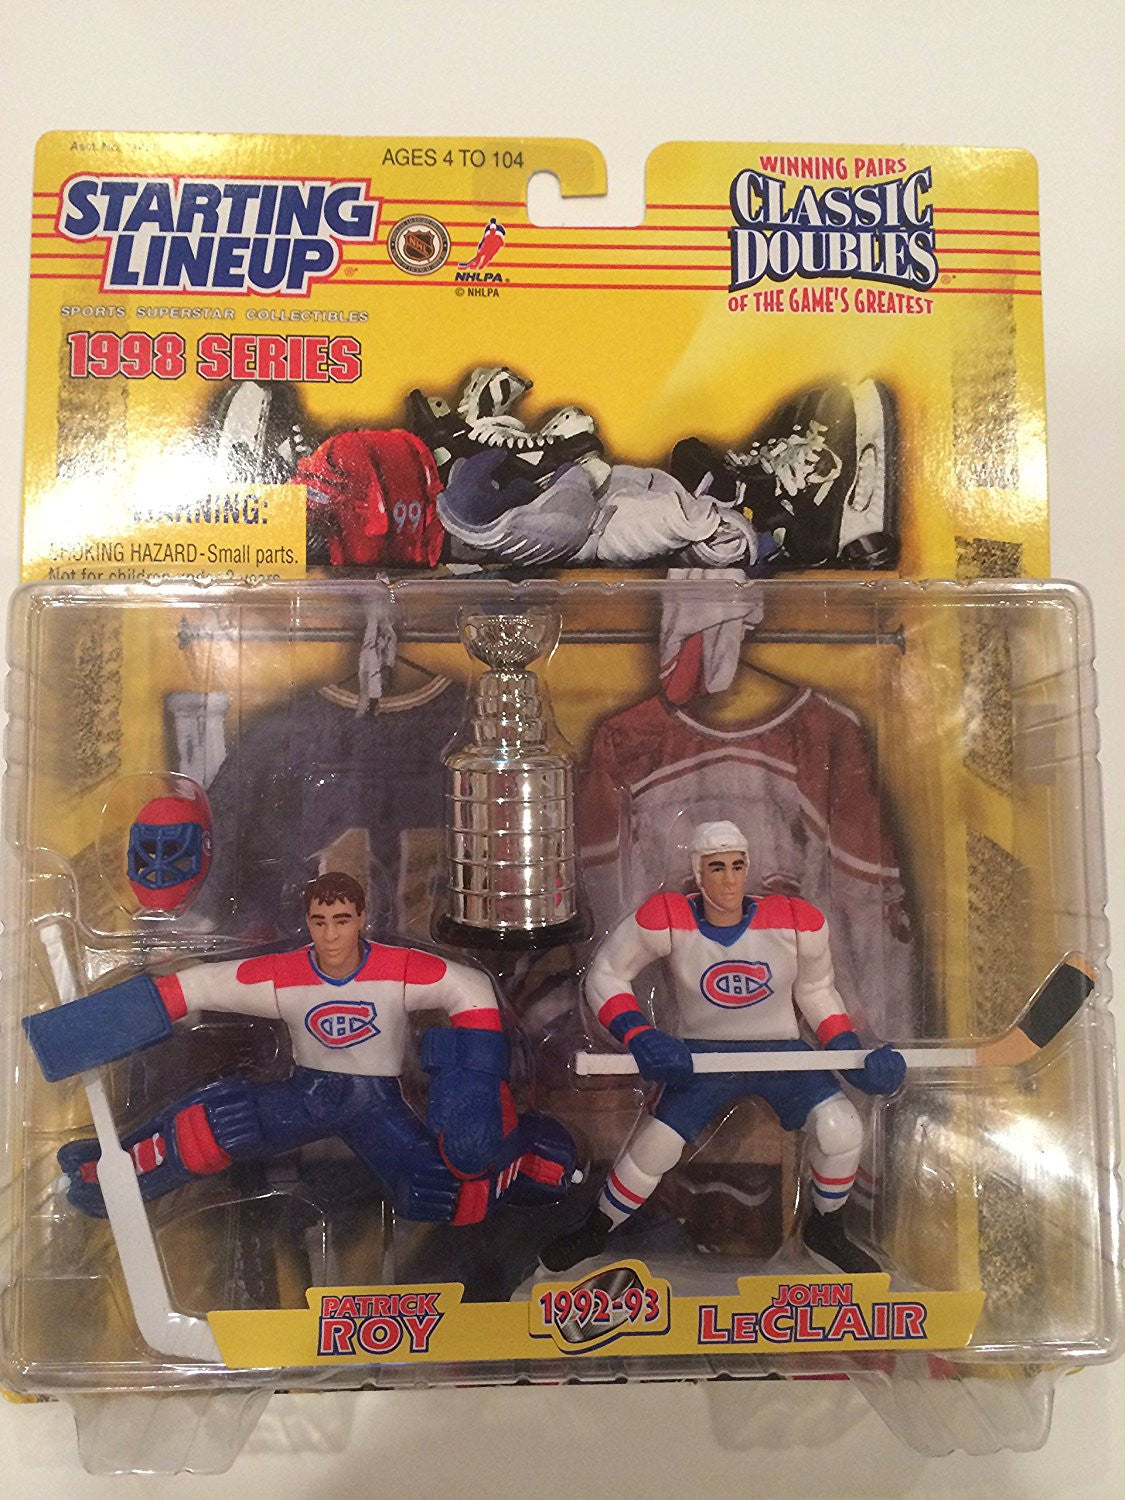 1998 Patrick Roy and John LeClair NHL Hockey Classic Doubles Starting Lineup Figures by Starting Line Up